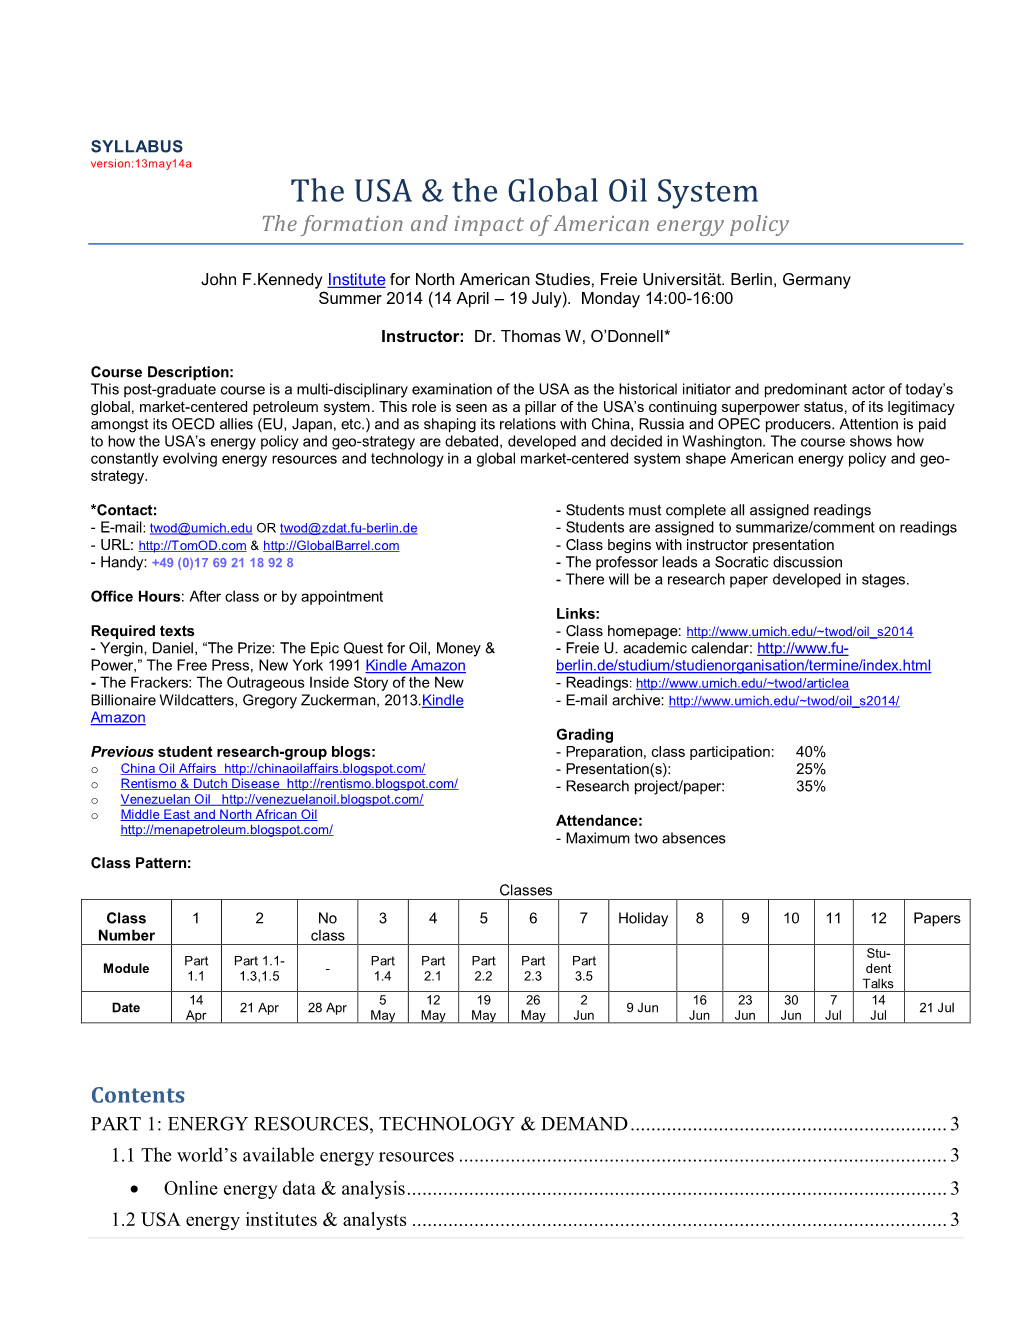 SYLLABUS Version:13May14a the USA & the Global Oil System the Formation and Impact of American Energy Policy